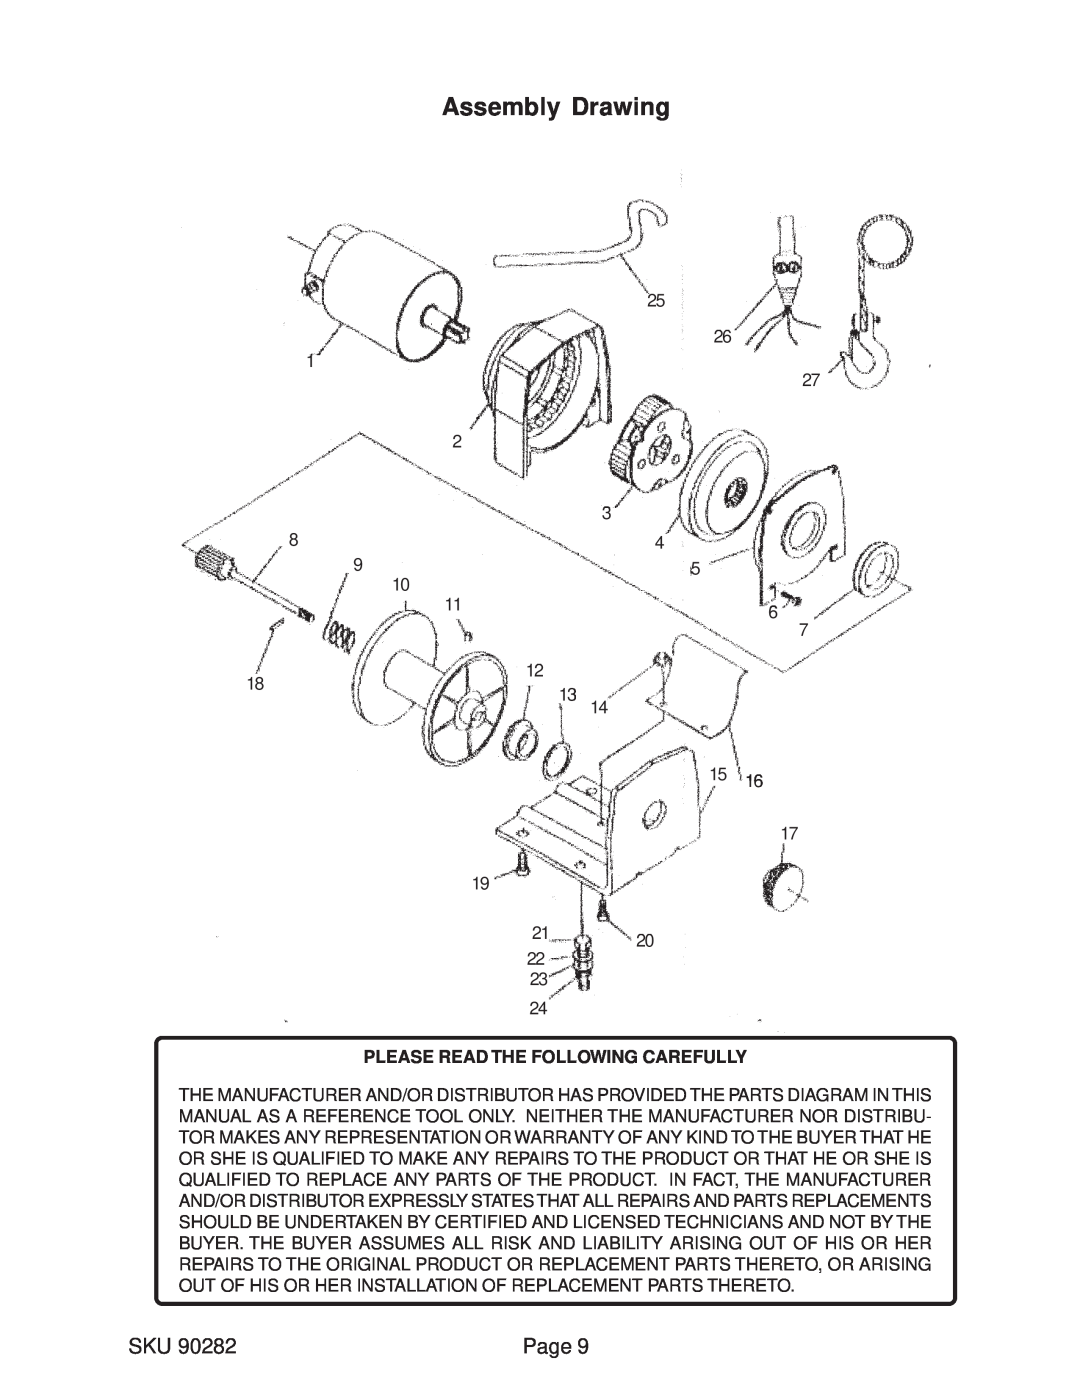 Chicago Electric 90282 manual Assembly Drawing, Page, Please Read The Following Carefully 